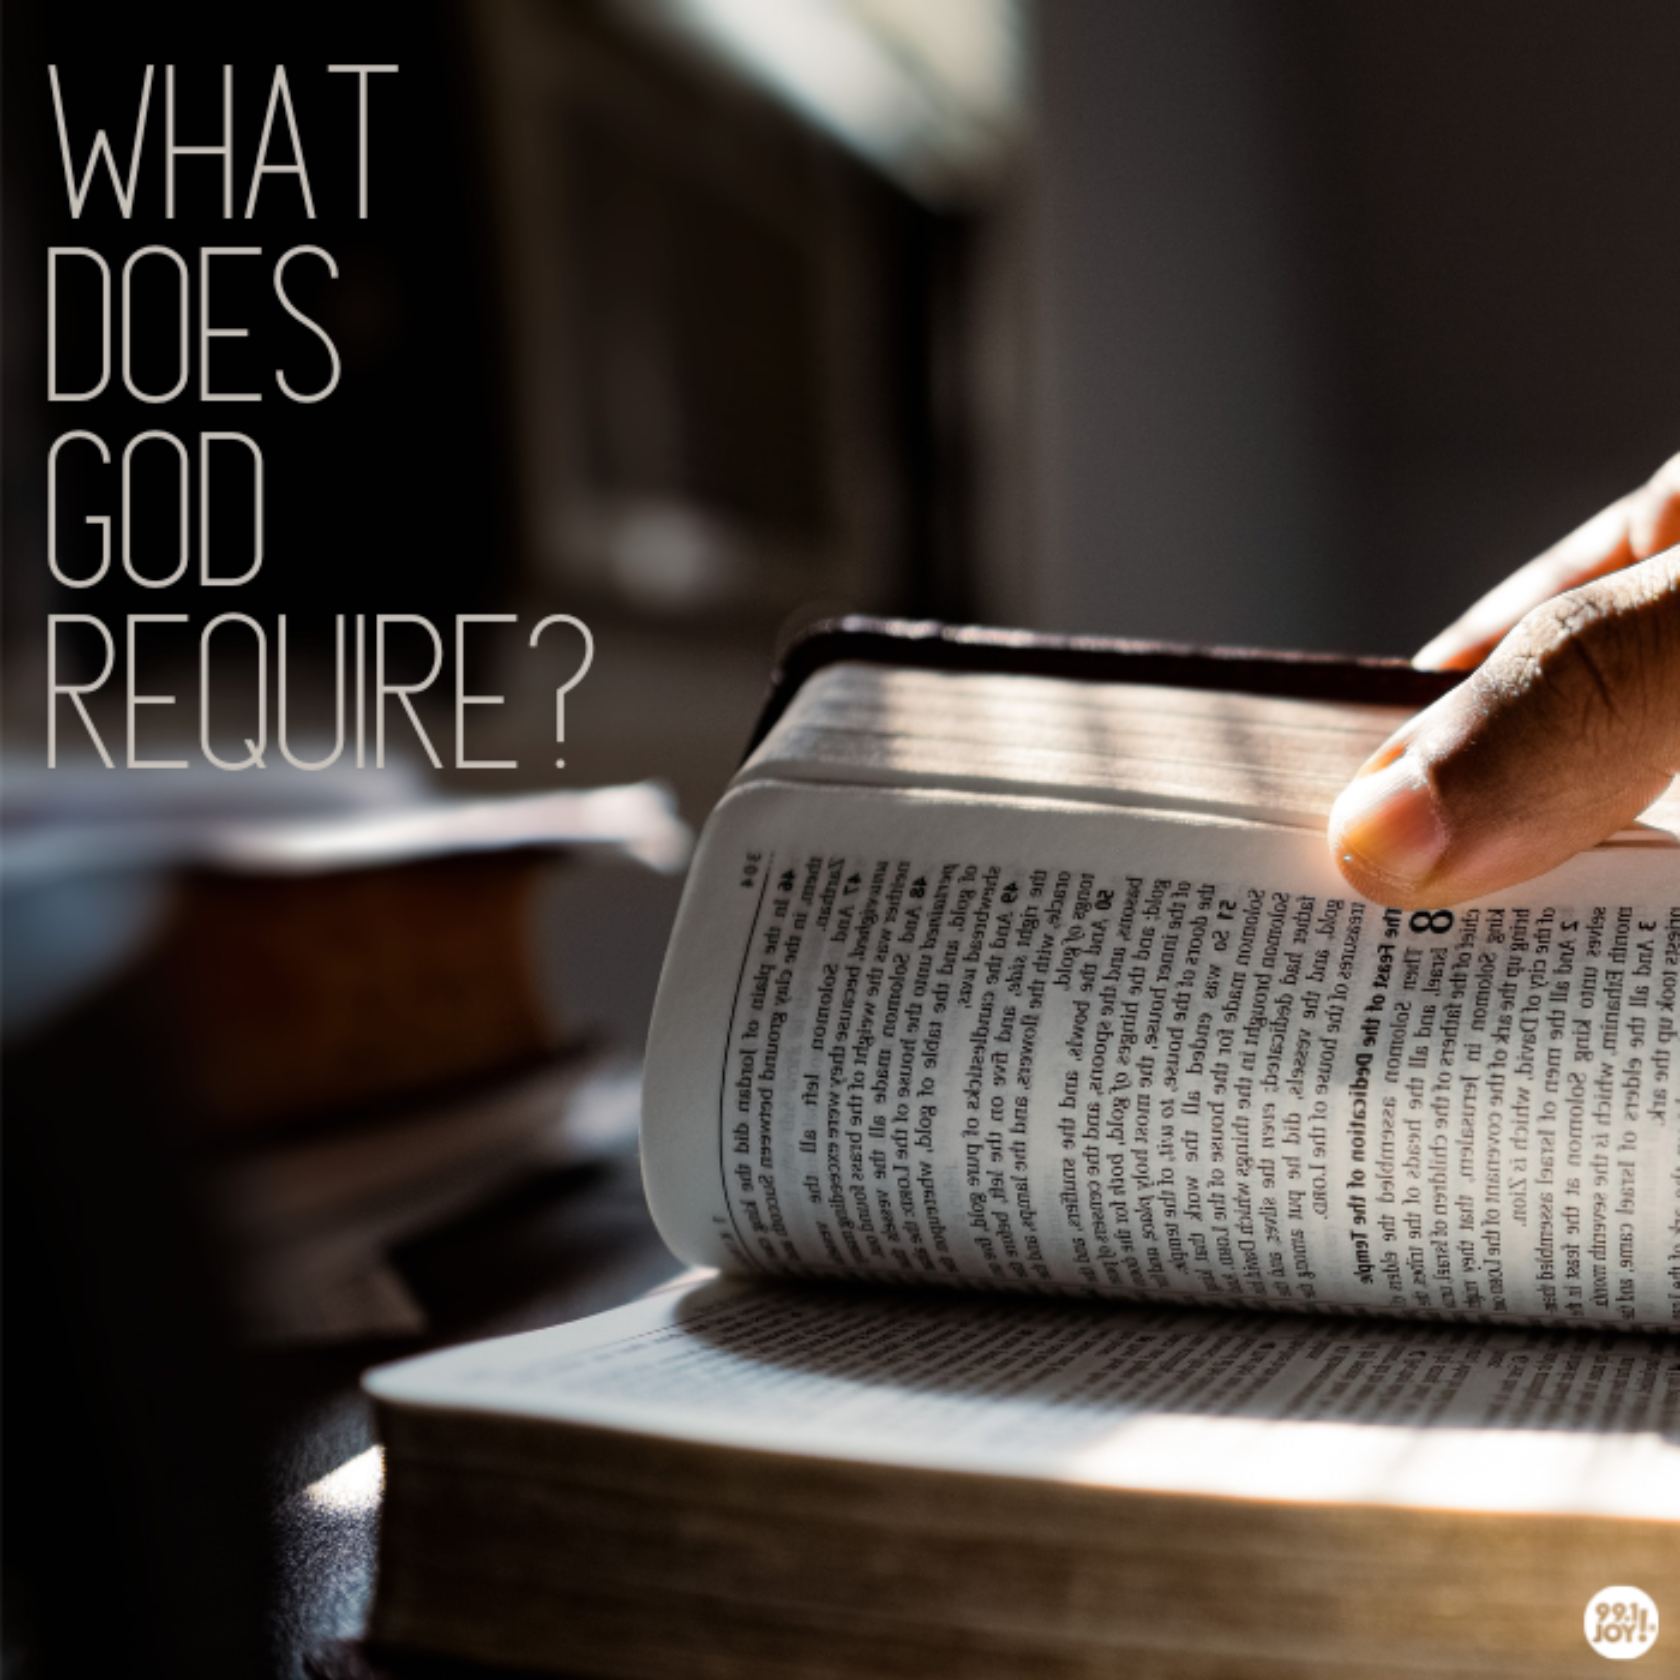 What Does God Require?